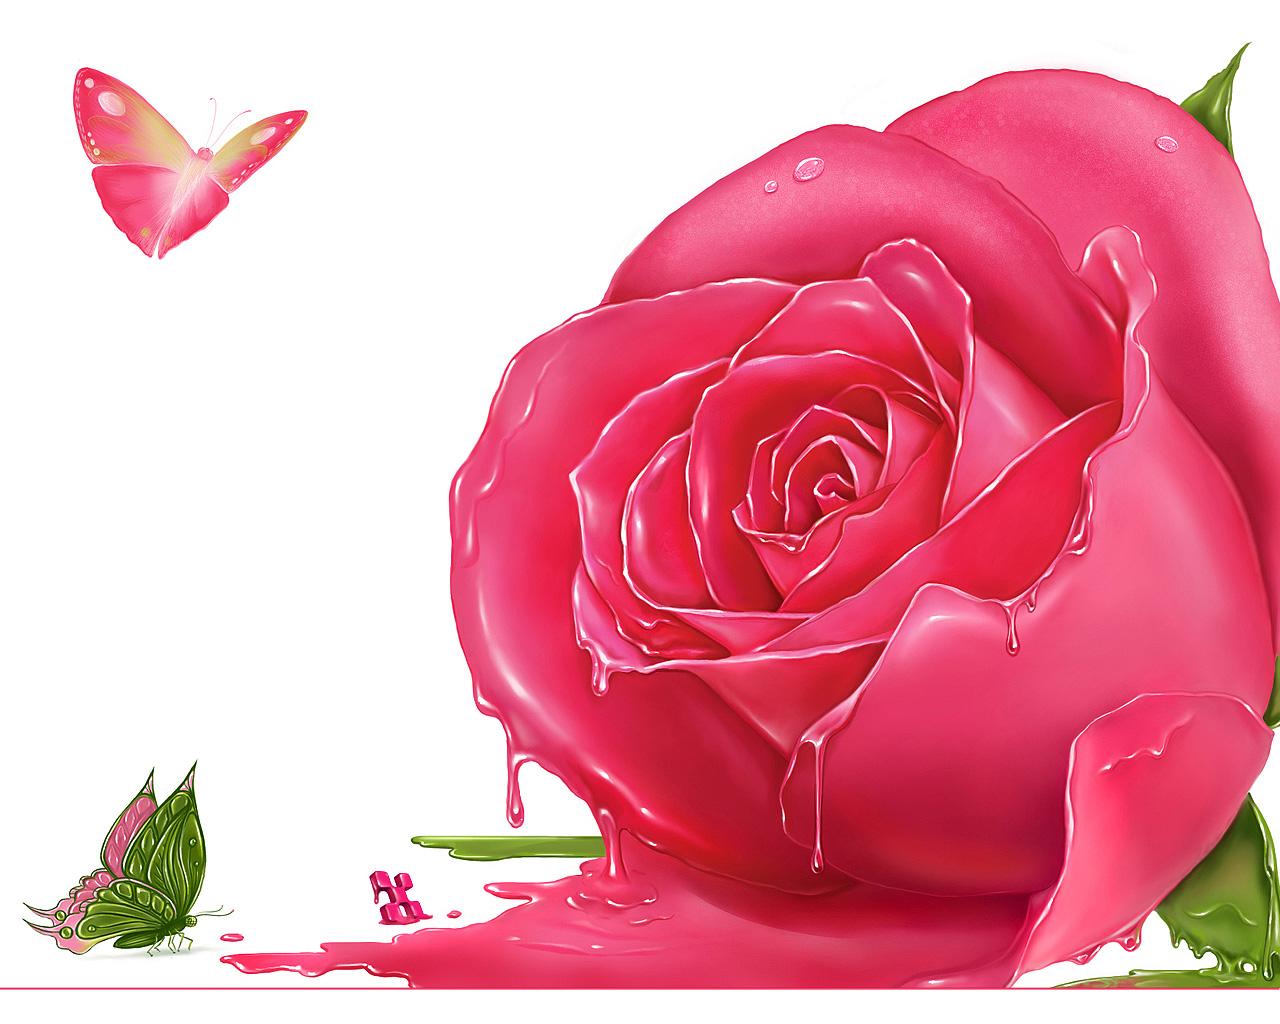  pink roses pink roses background free wallpapers download free